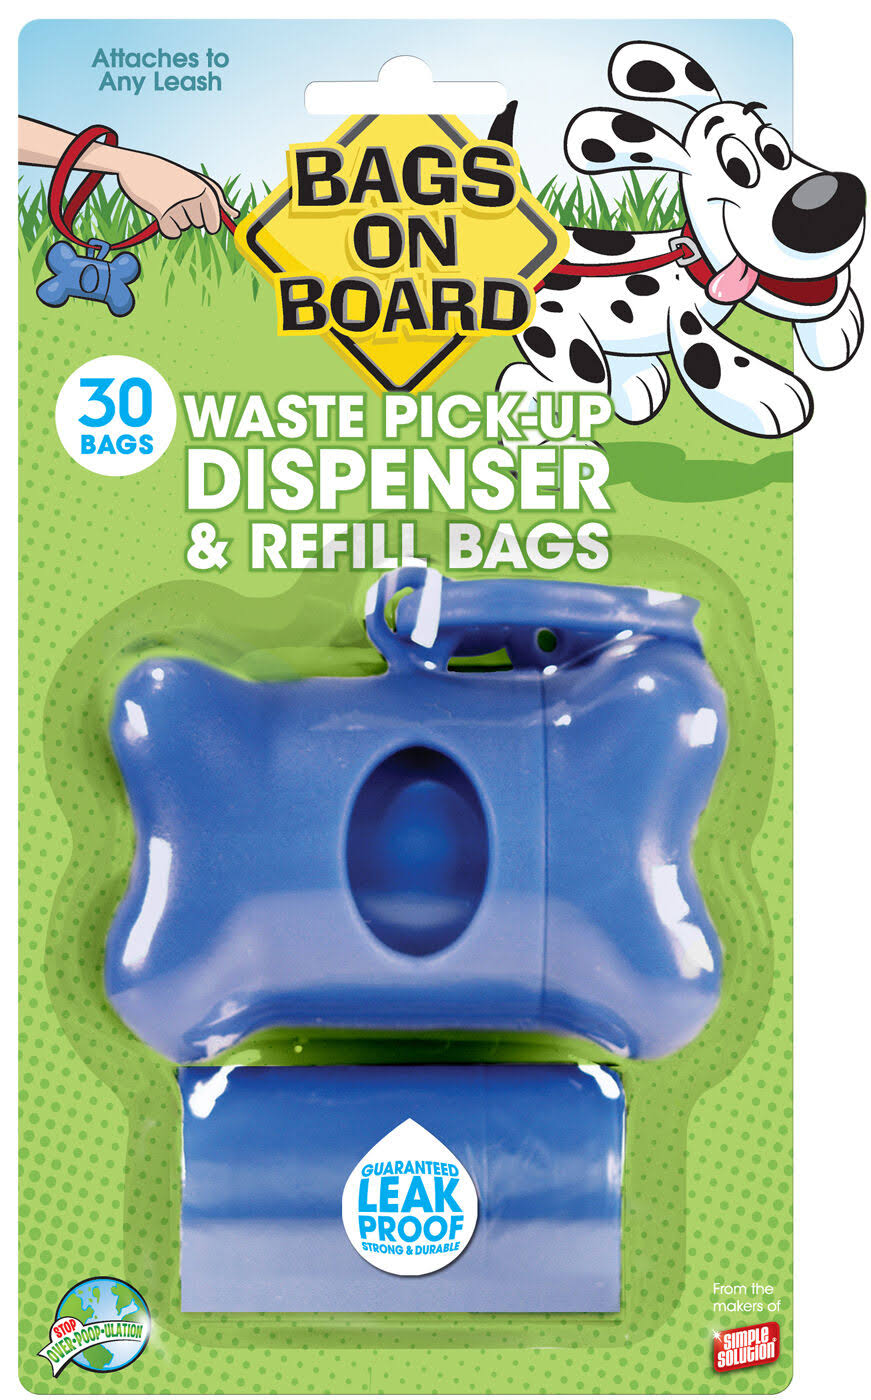 Bags On Board Waste Pick-Up Dispenser & Refill Bags - Blue, 30 Bags